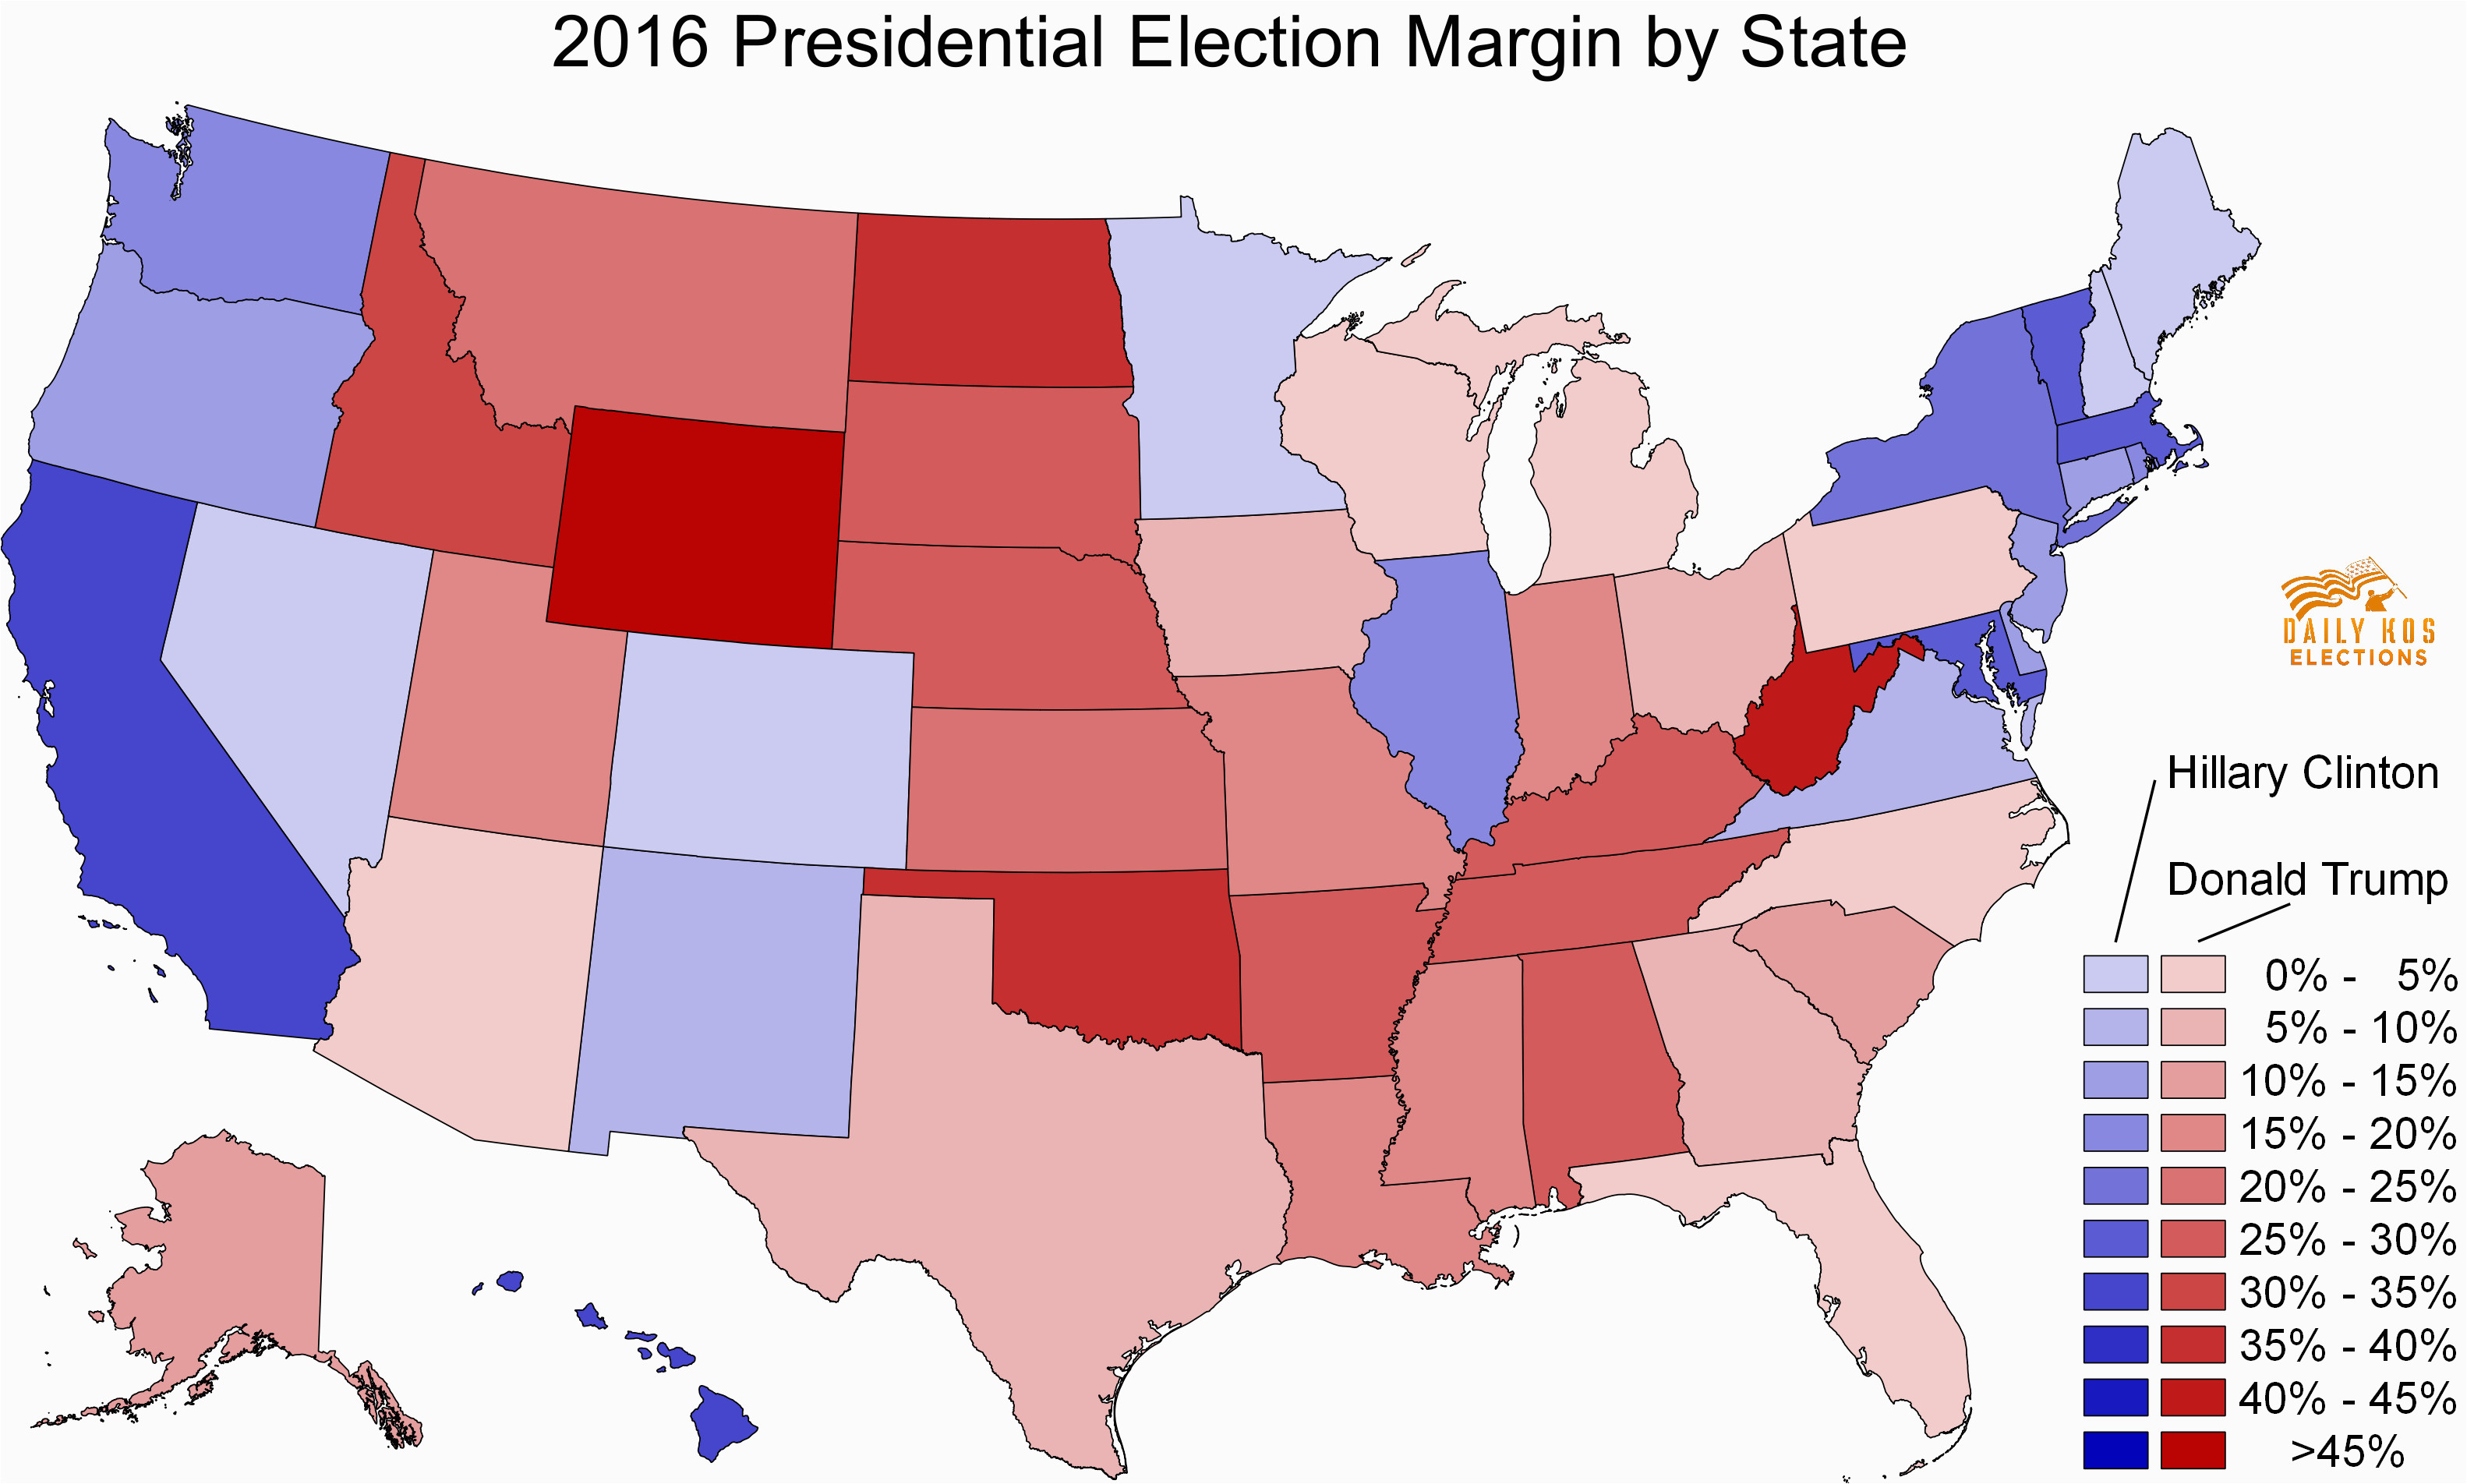 daily kos elections median district scores show how strong the